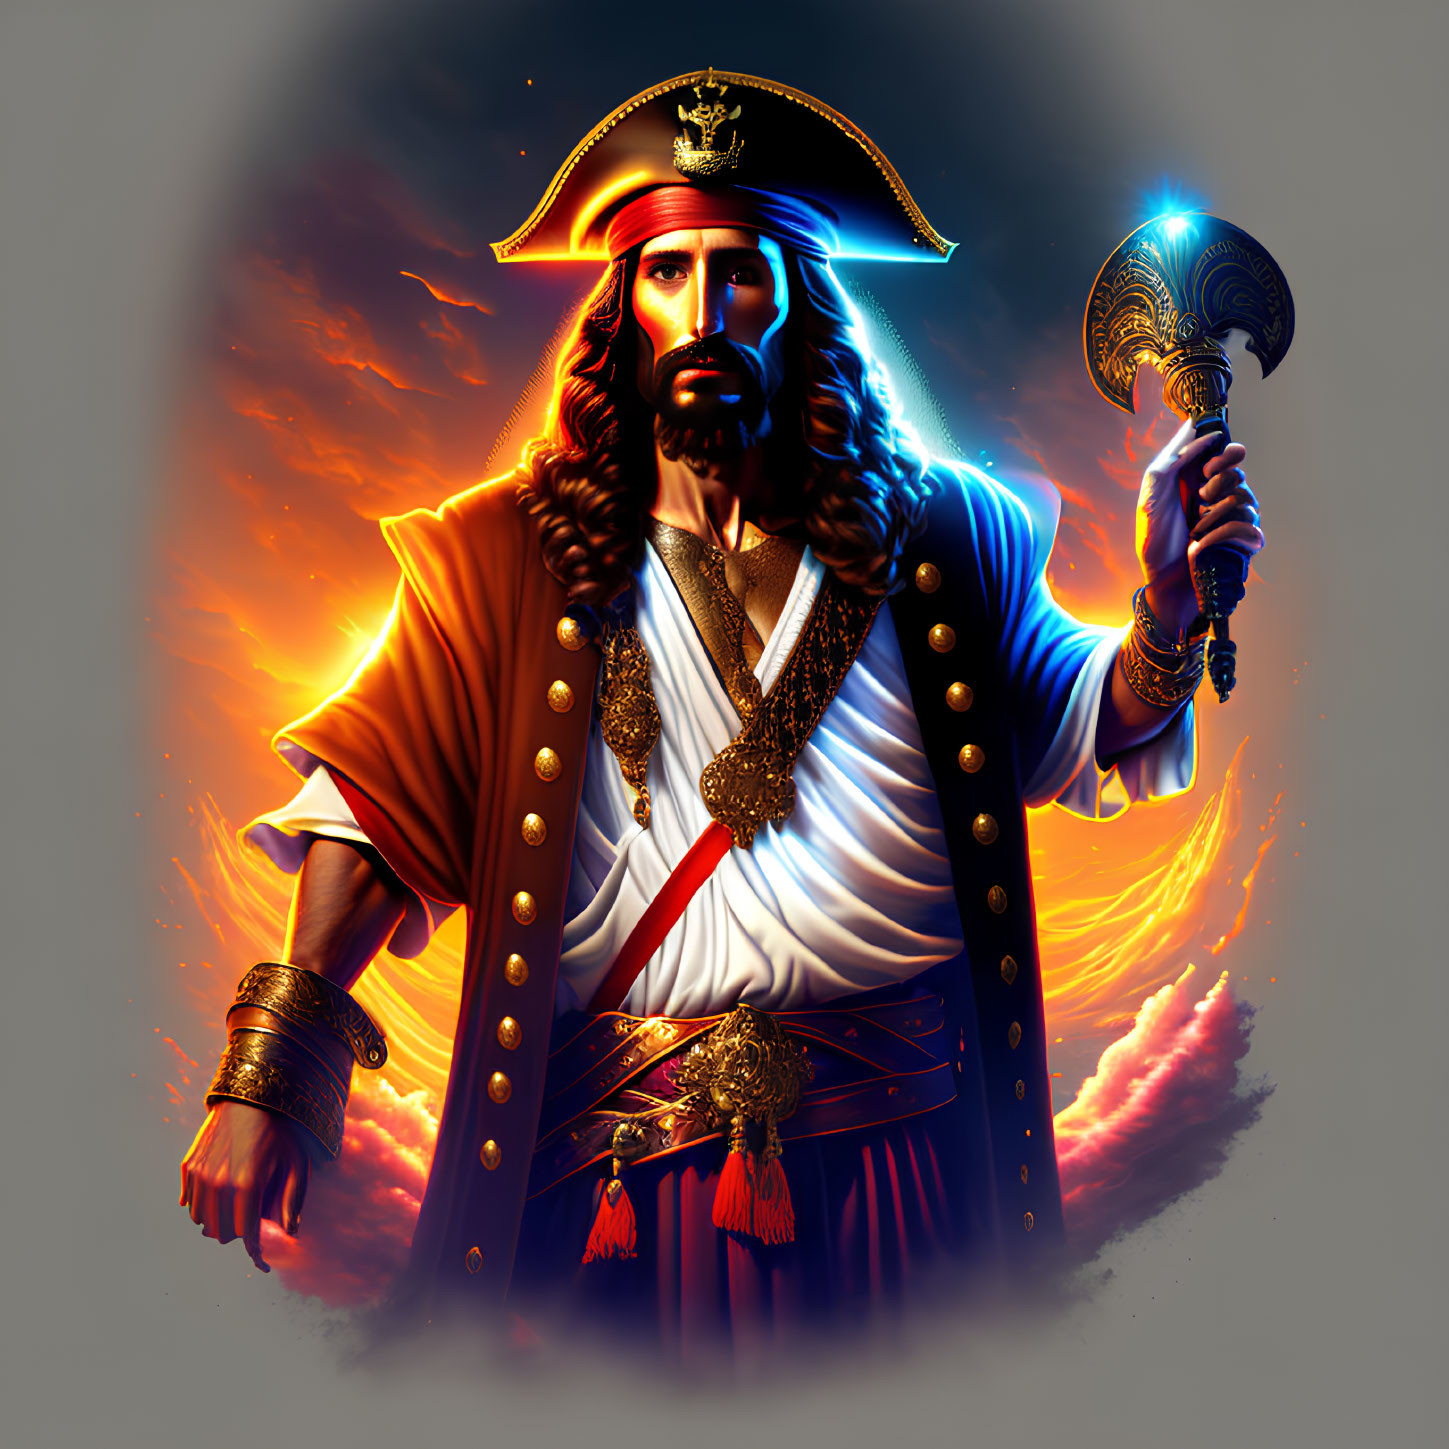 Illustrated figure resembling Jesus in pirate captain attire with scepter, fiery backdrop